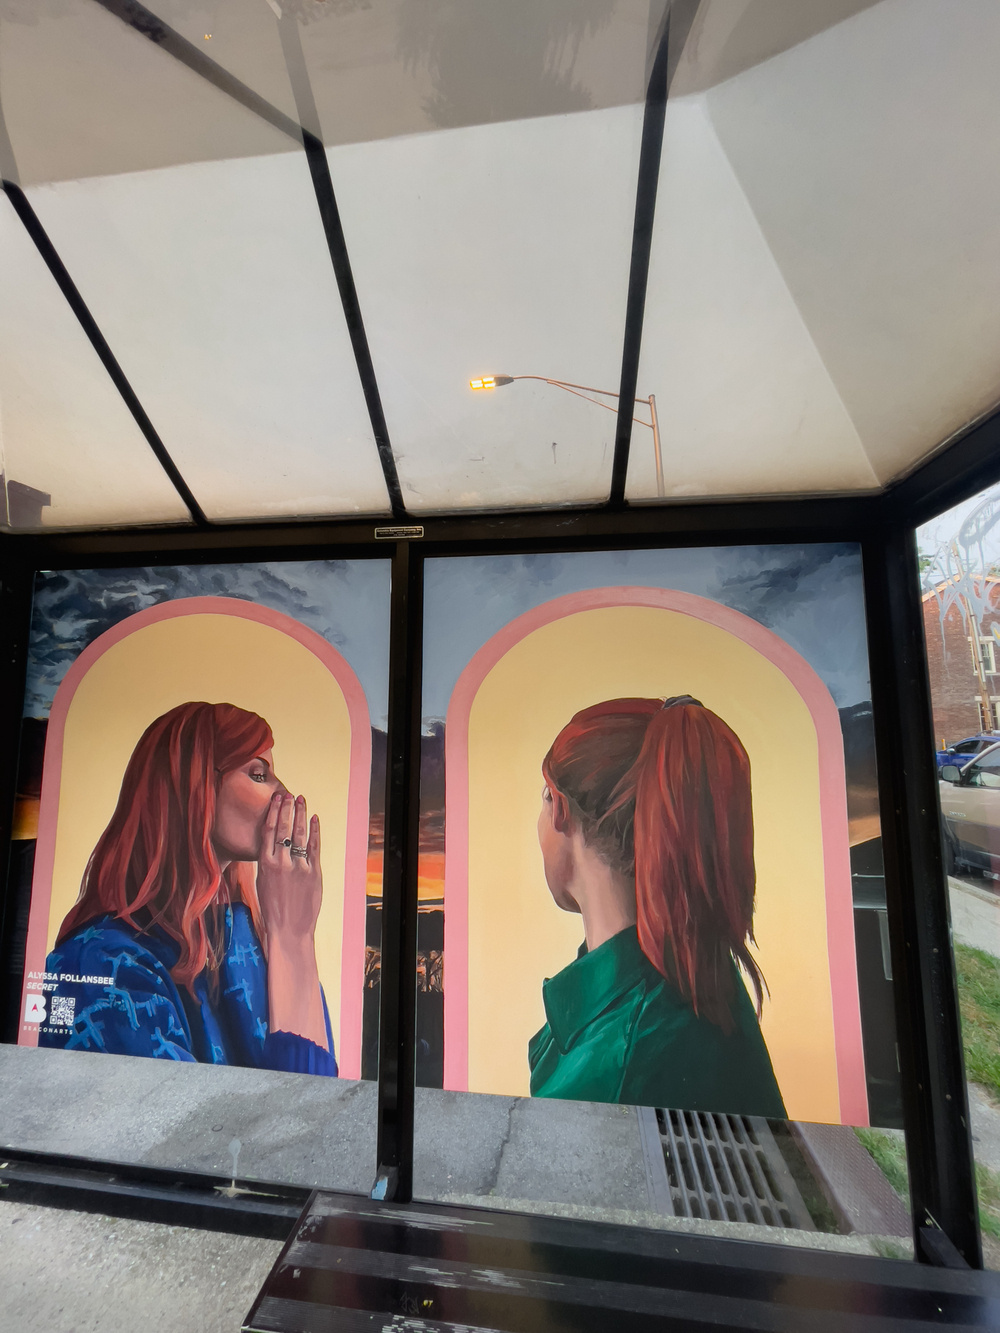 Bus shelter with artwork. Paintings of two women, the woman on left appears to be whispering into the ear of the woman on the right. The transparent plexi roof with streetlight in the distance.